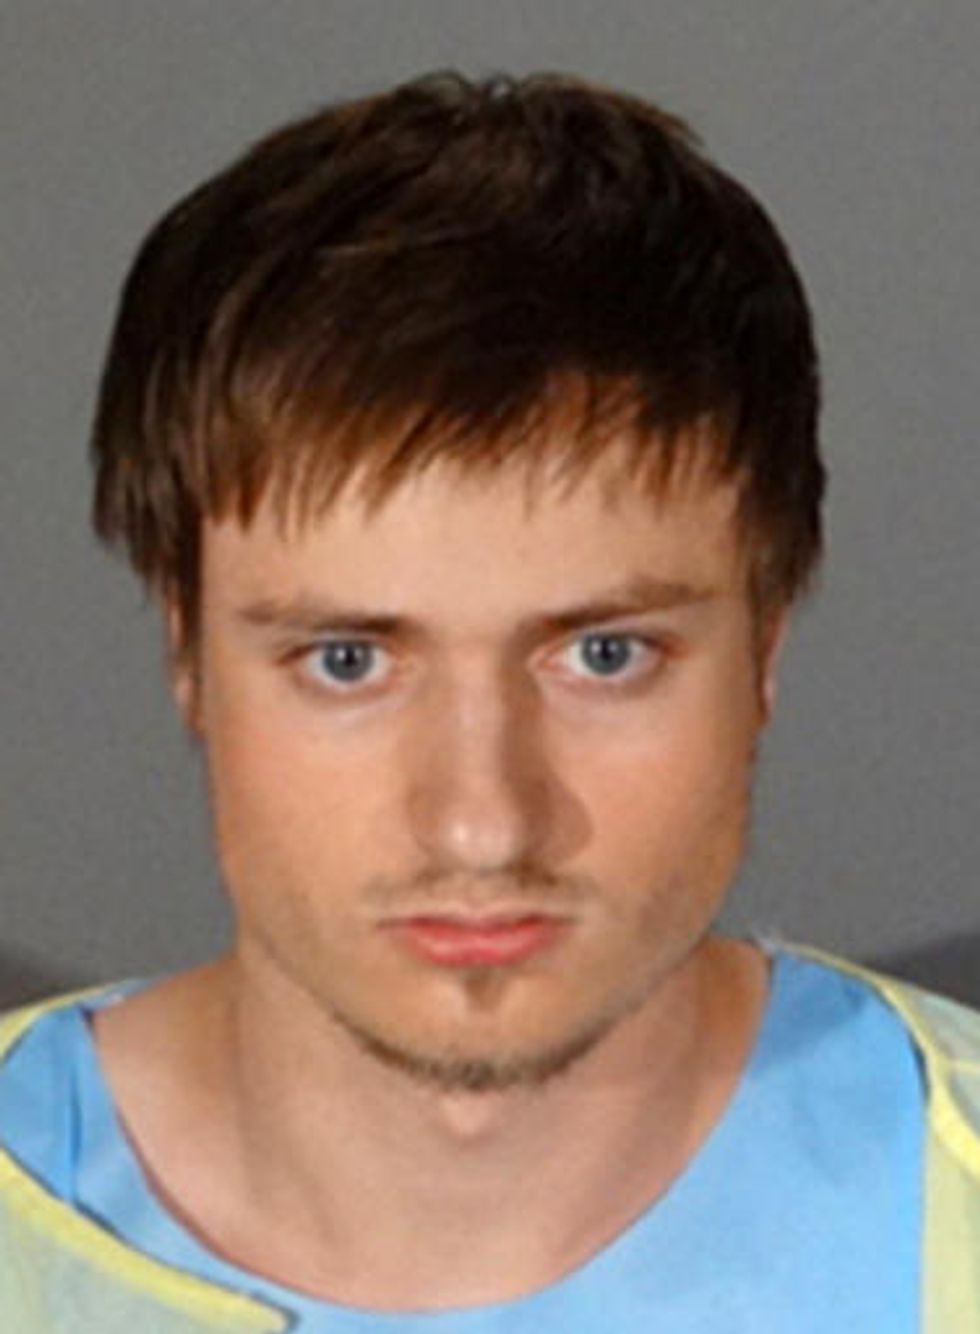 Indiana Man Arrested With Arsenal on Way to L.A. Gay Pride Parade Wasn’t Allowed to Have Guns